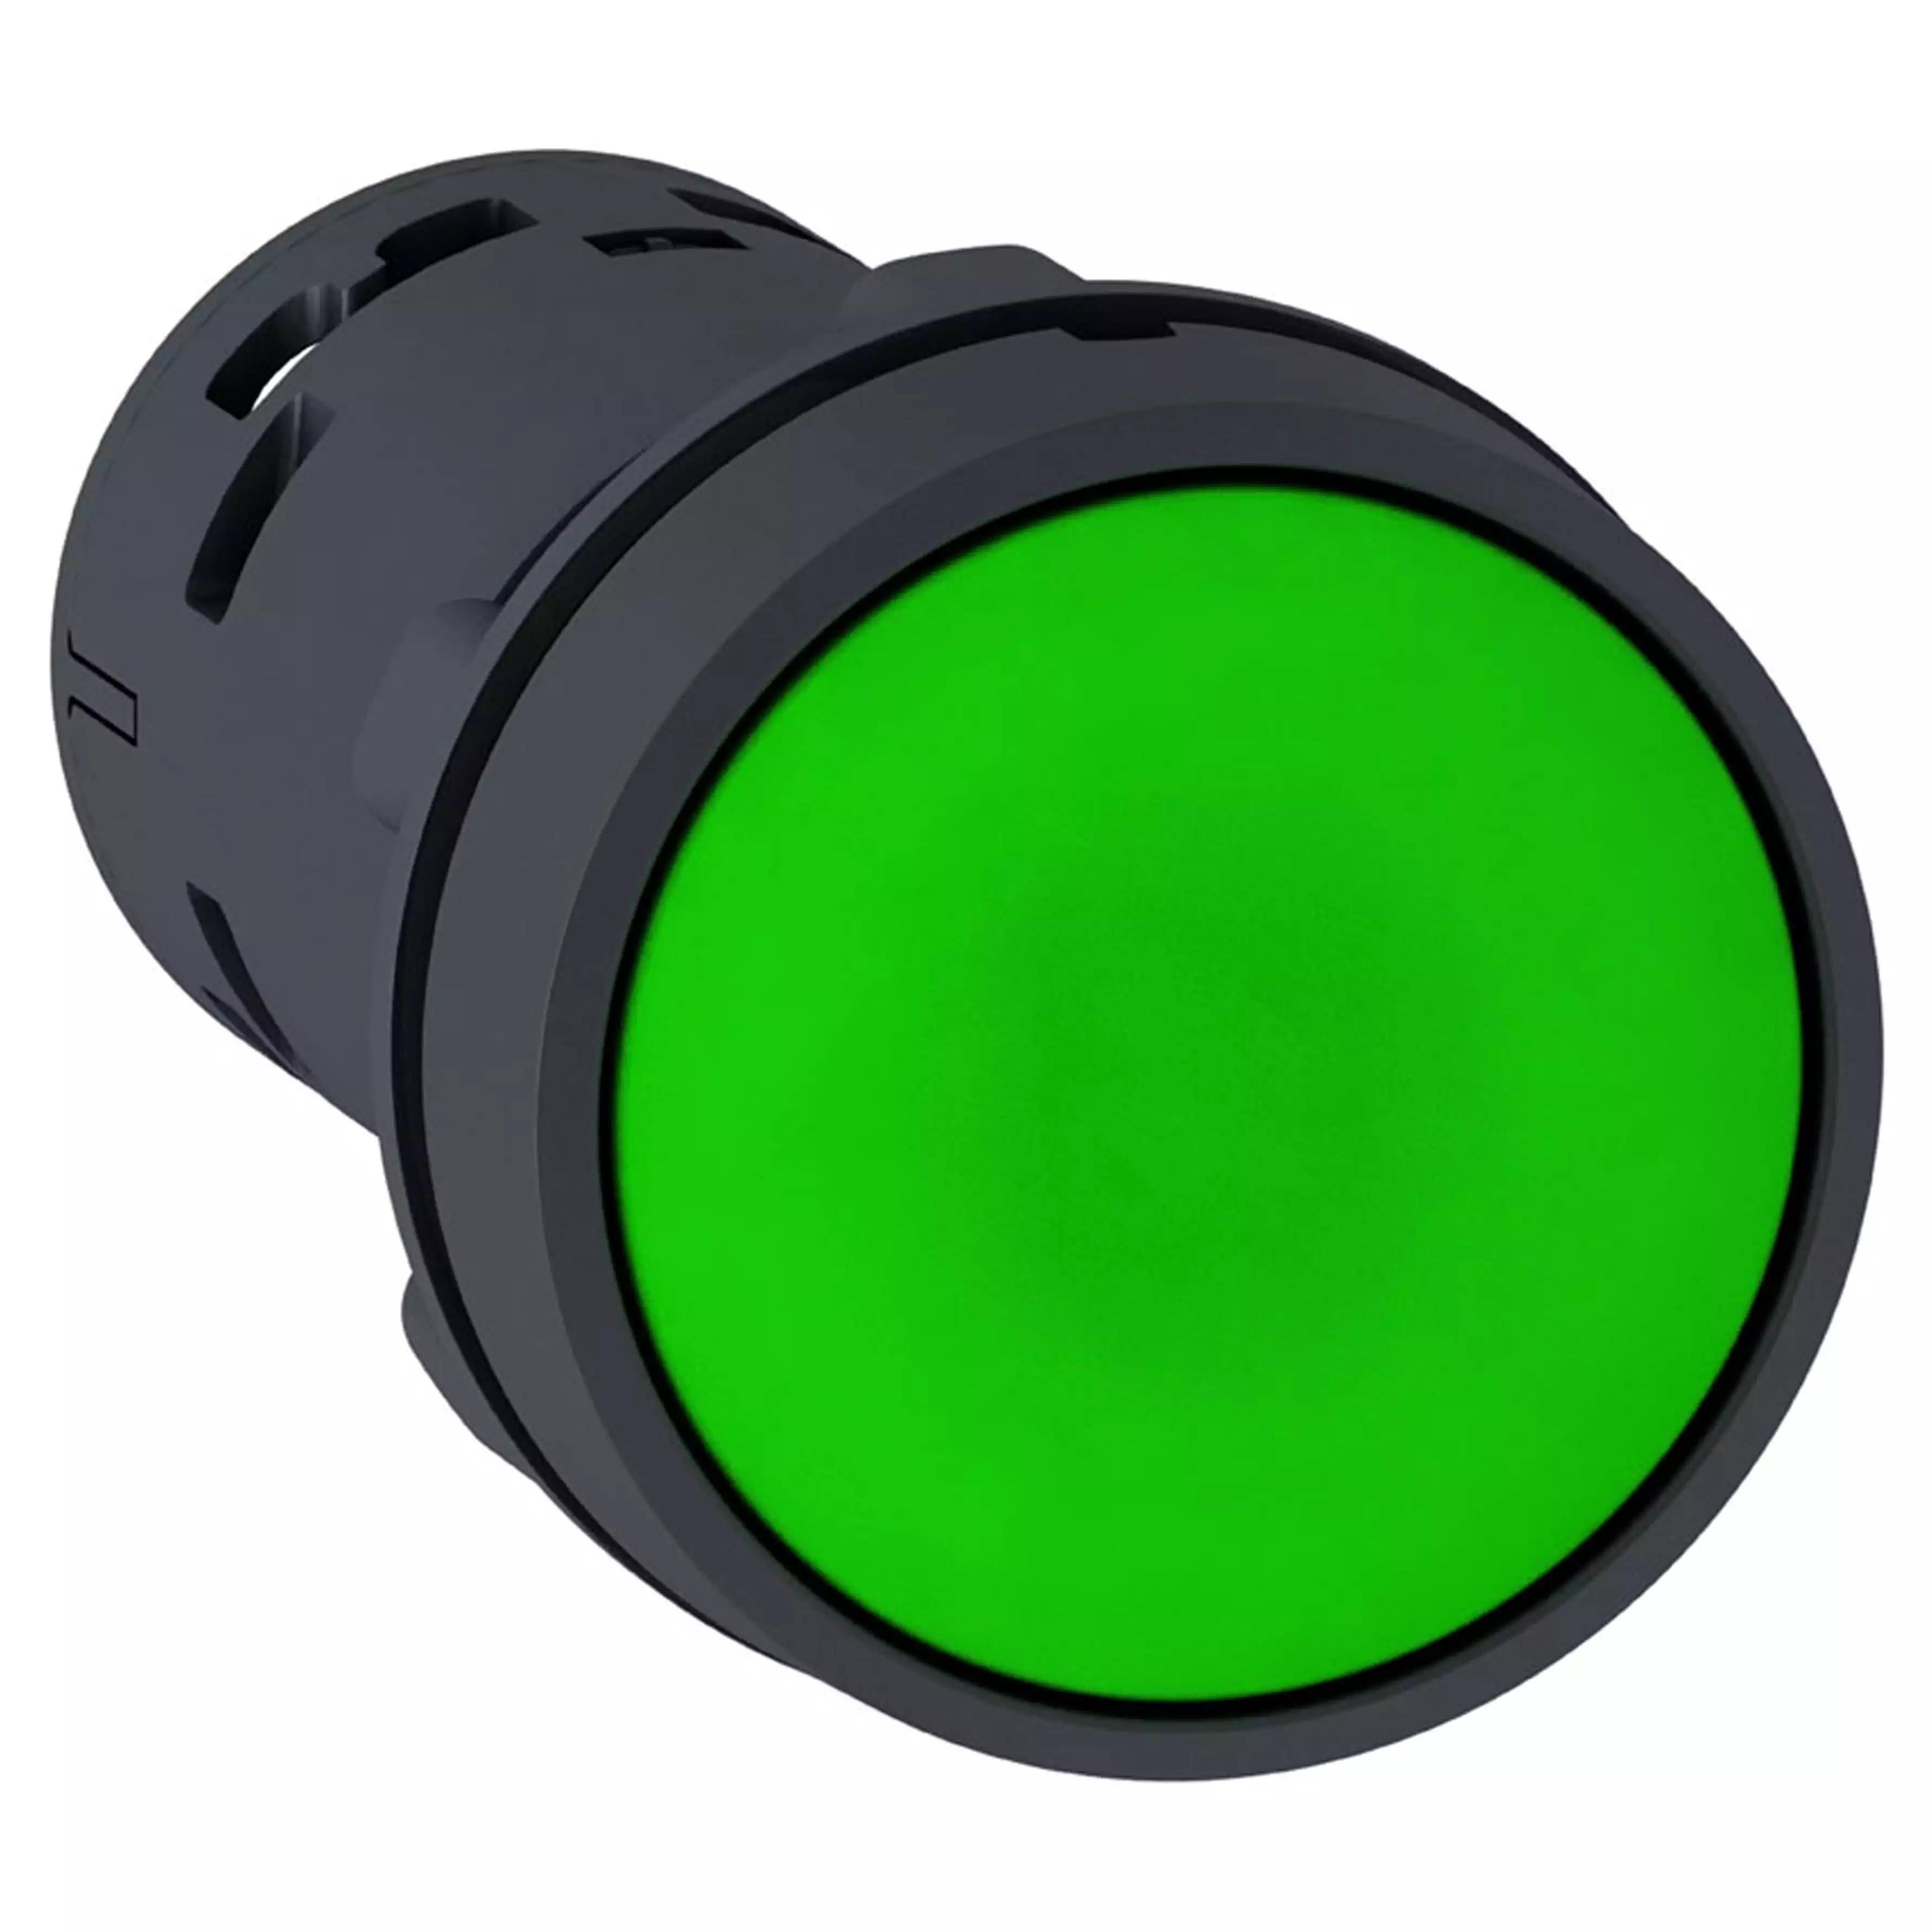 Monolithic push button, Harmony XB7, plastic, green, 22mm, spring return, unmarked, 1NO+1NC